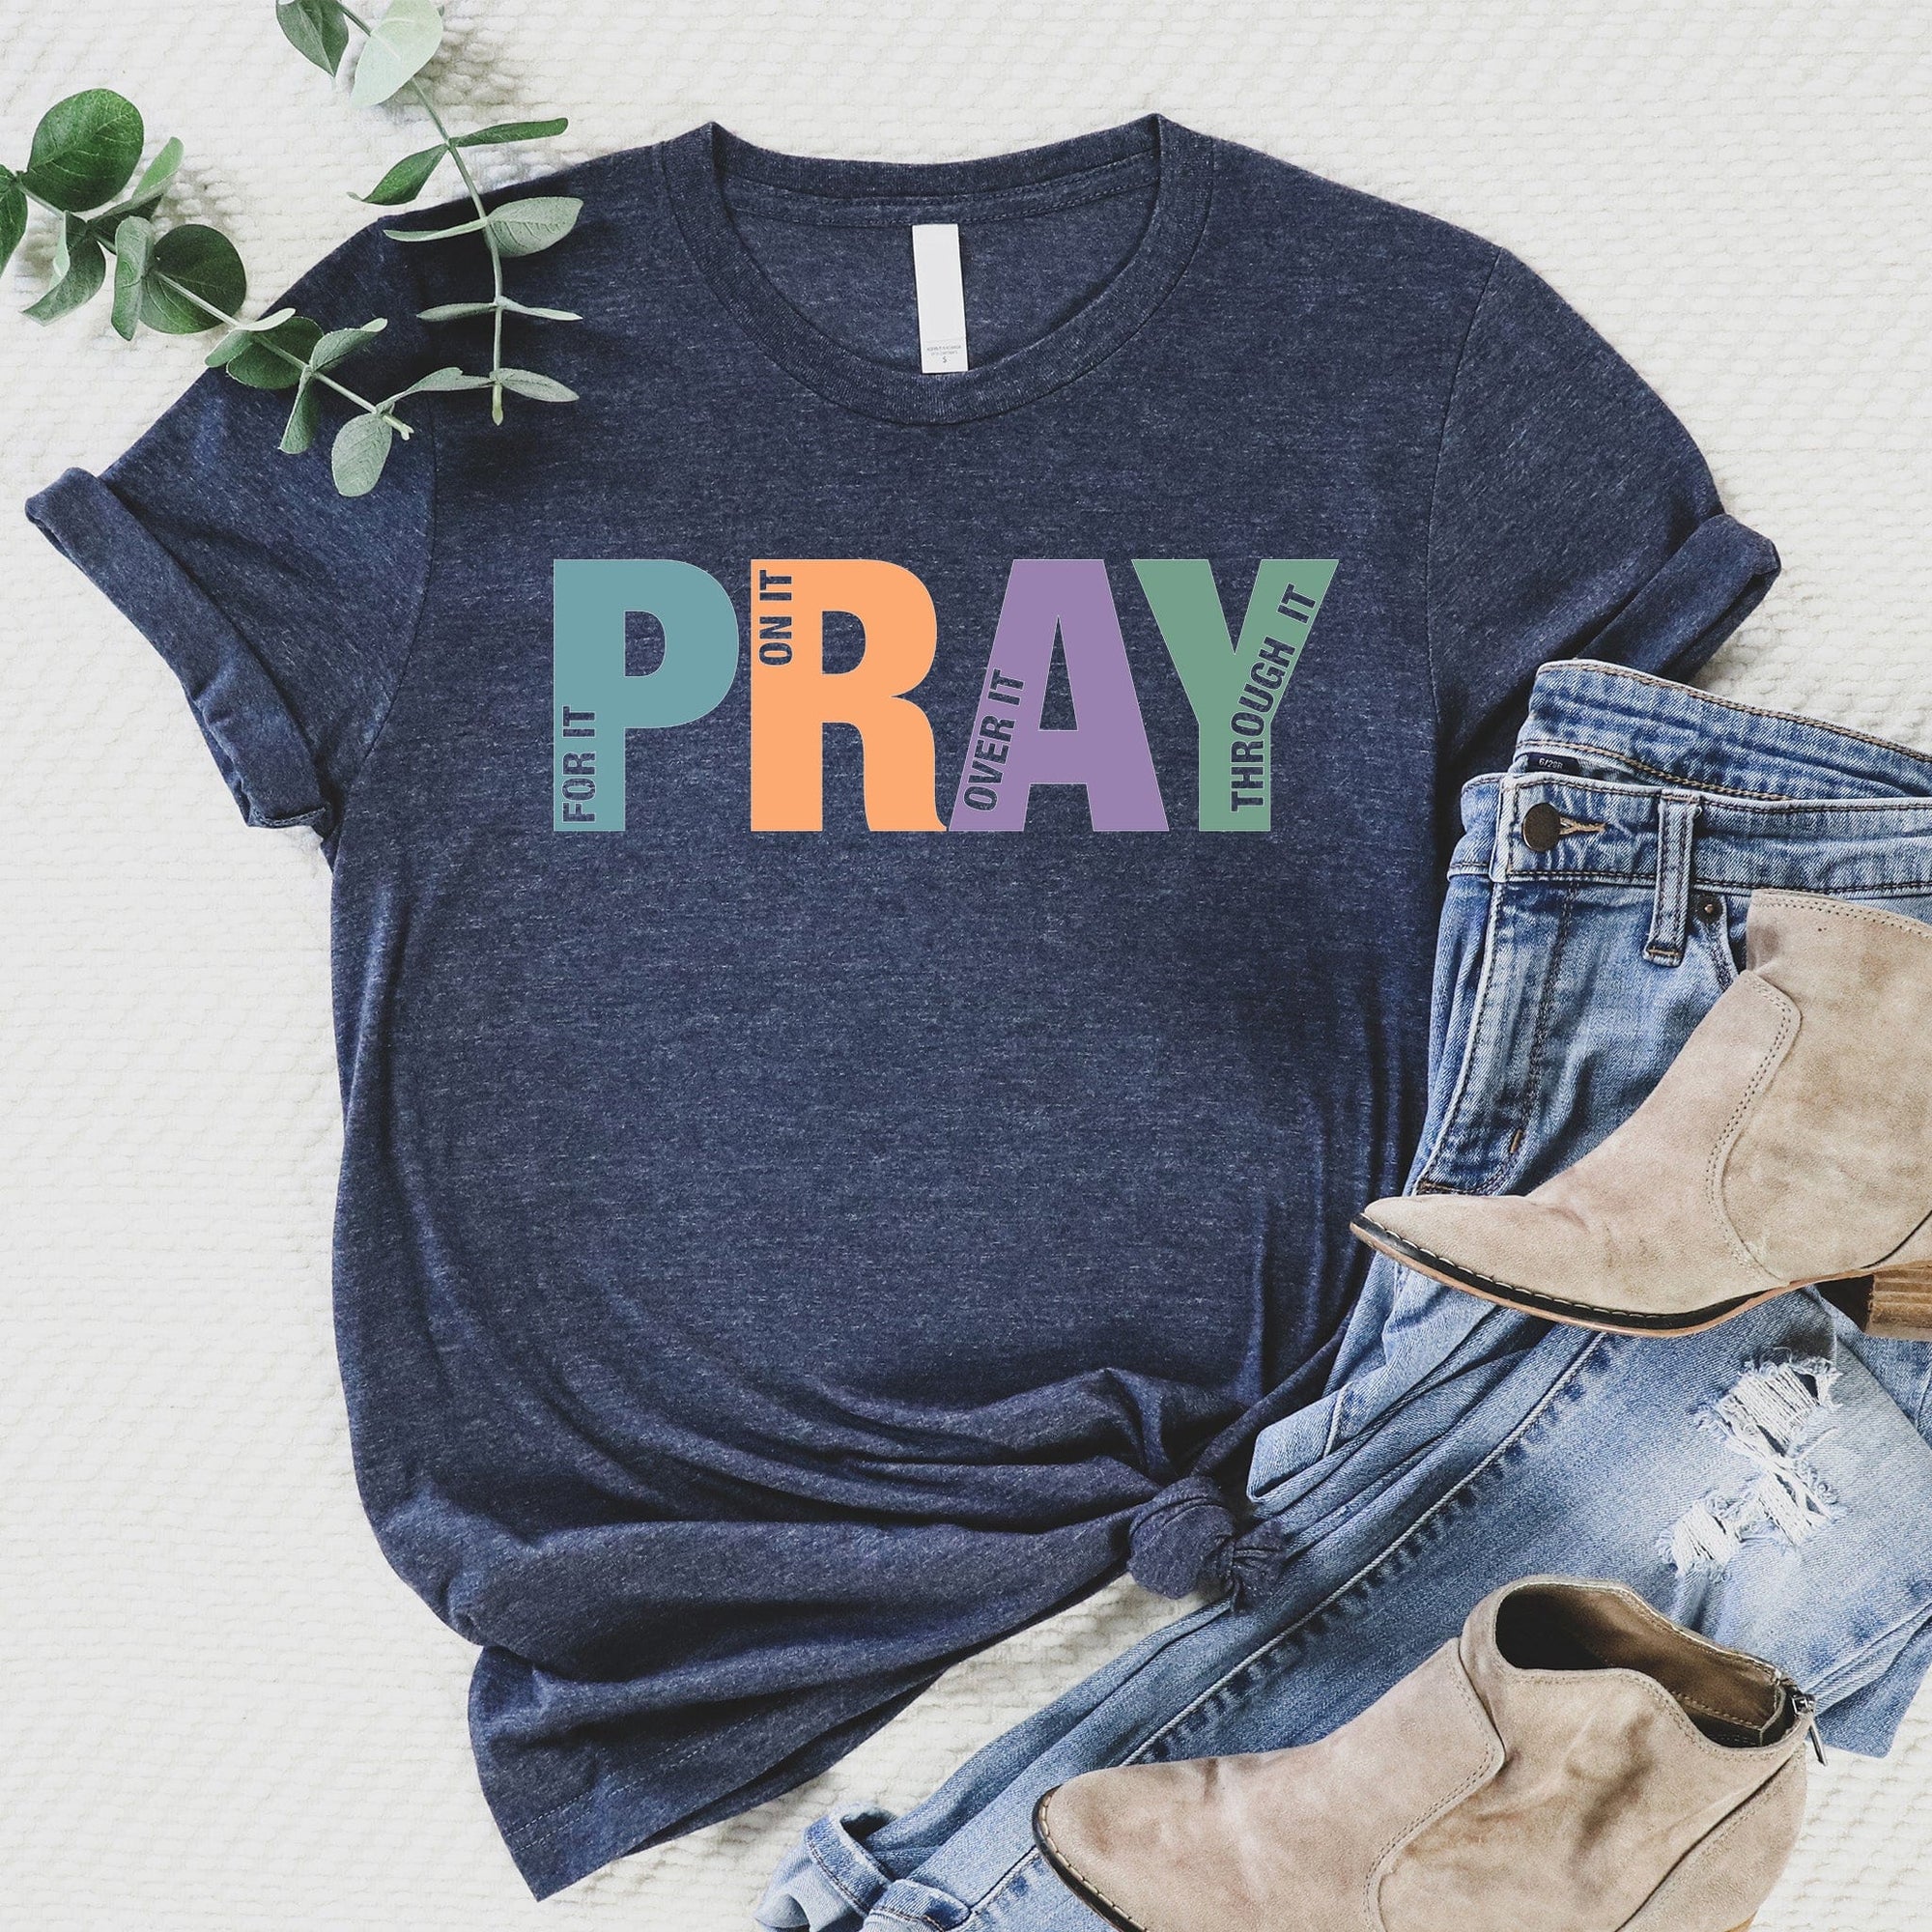 Pray On It Over It Through It T Shirts For Women - Women's Christian T Shirts - Women's Religious Shirts